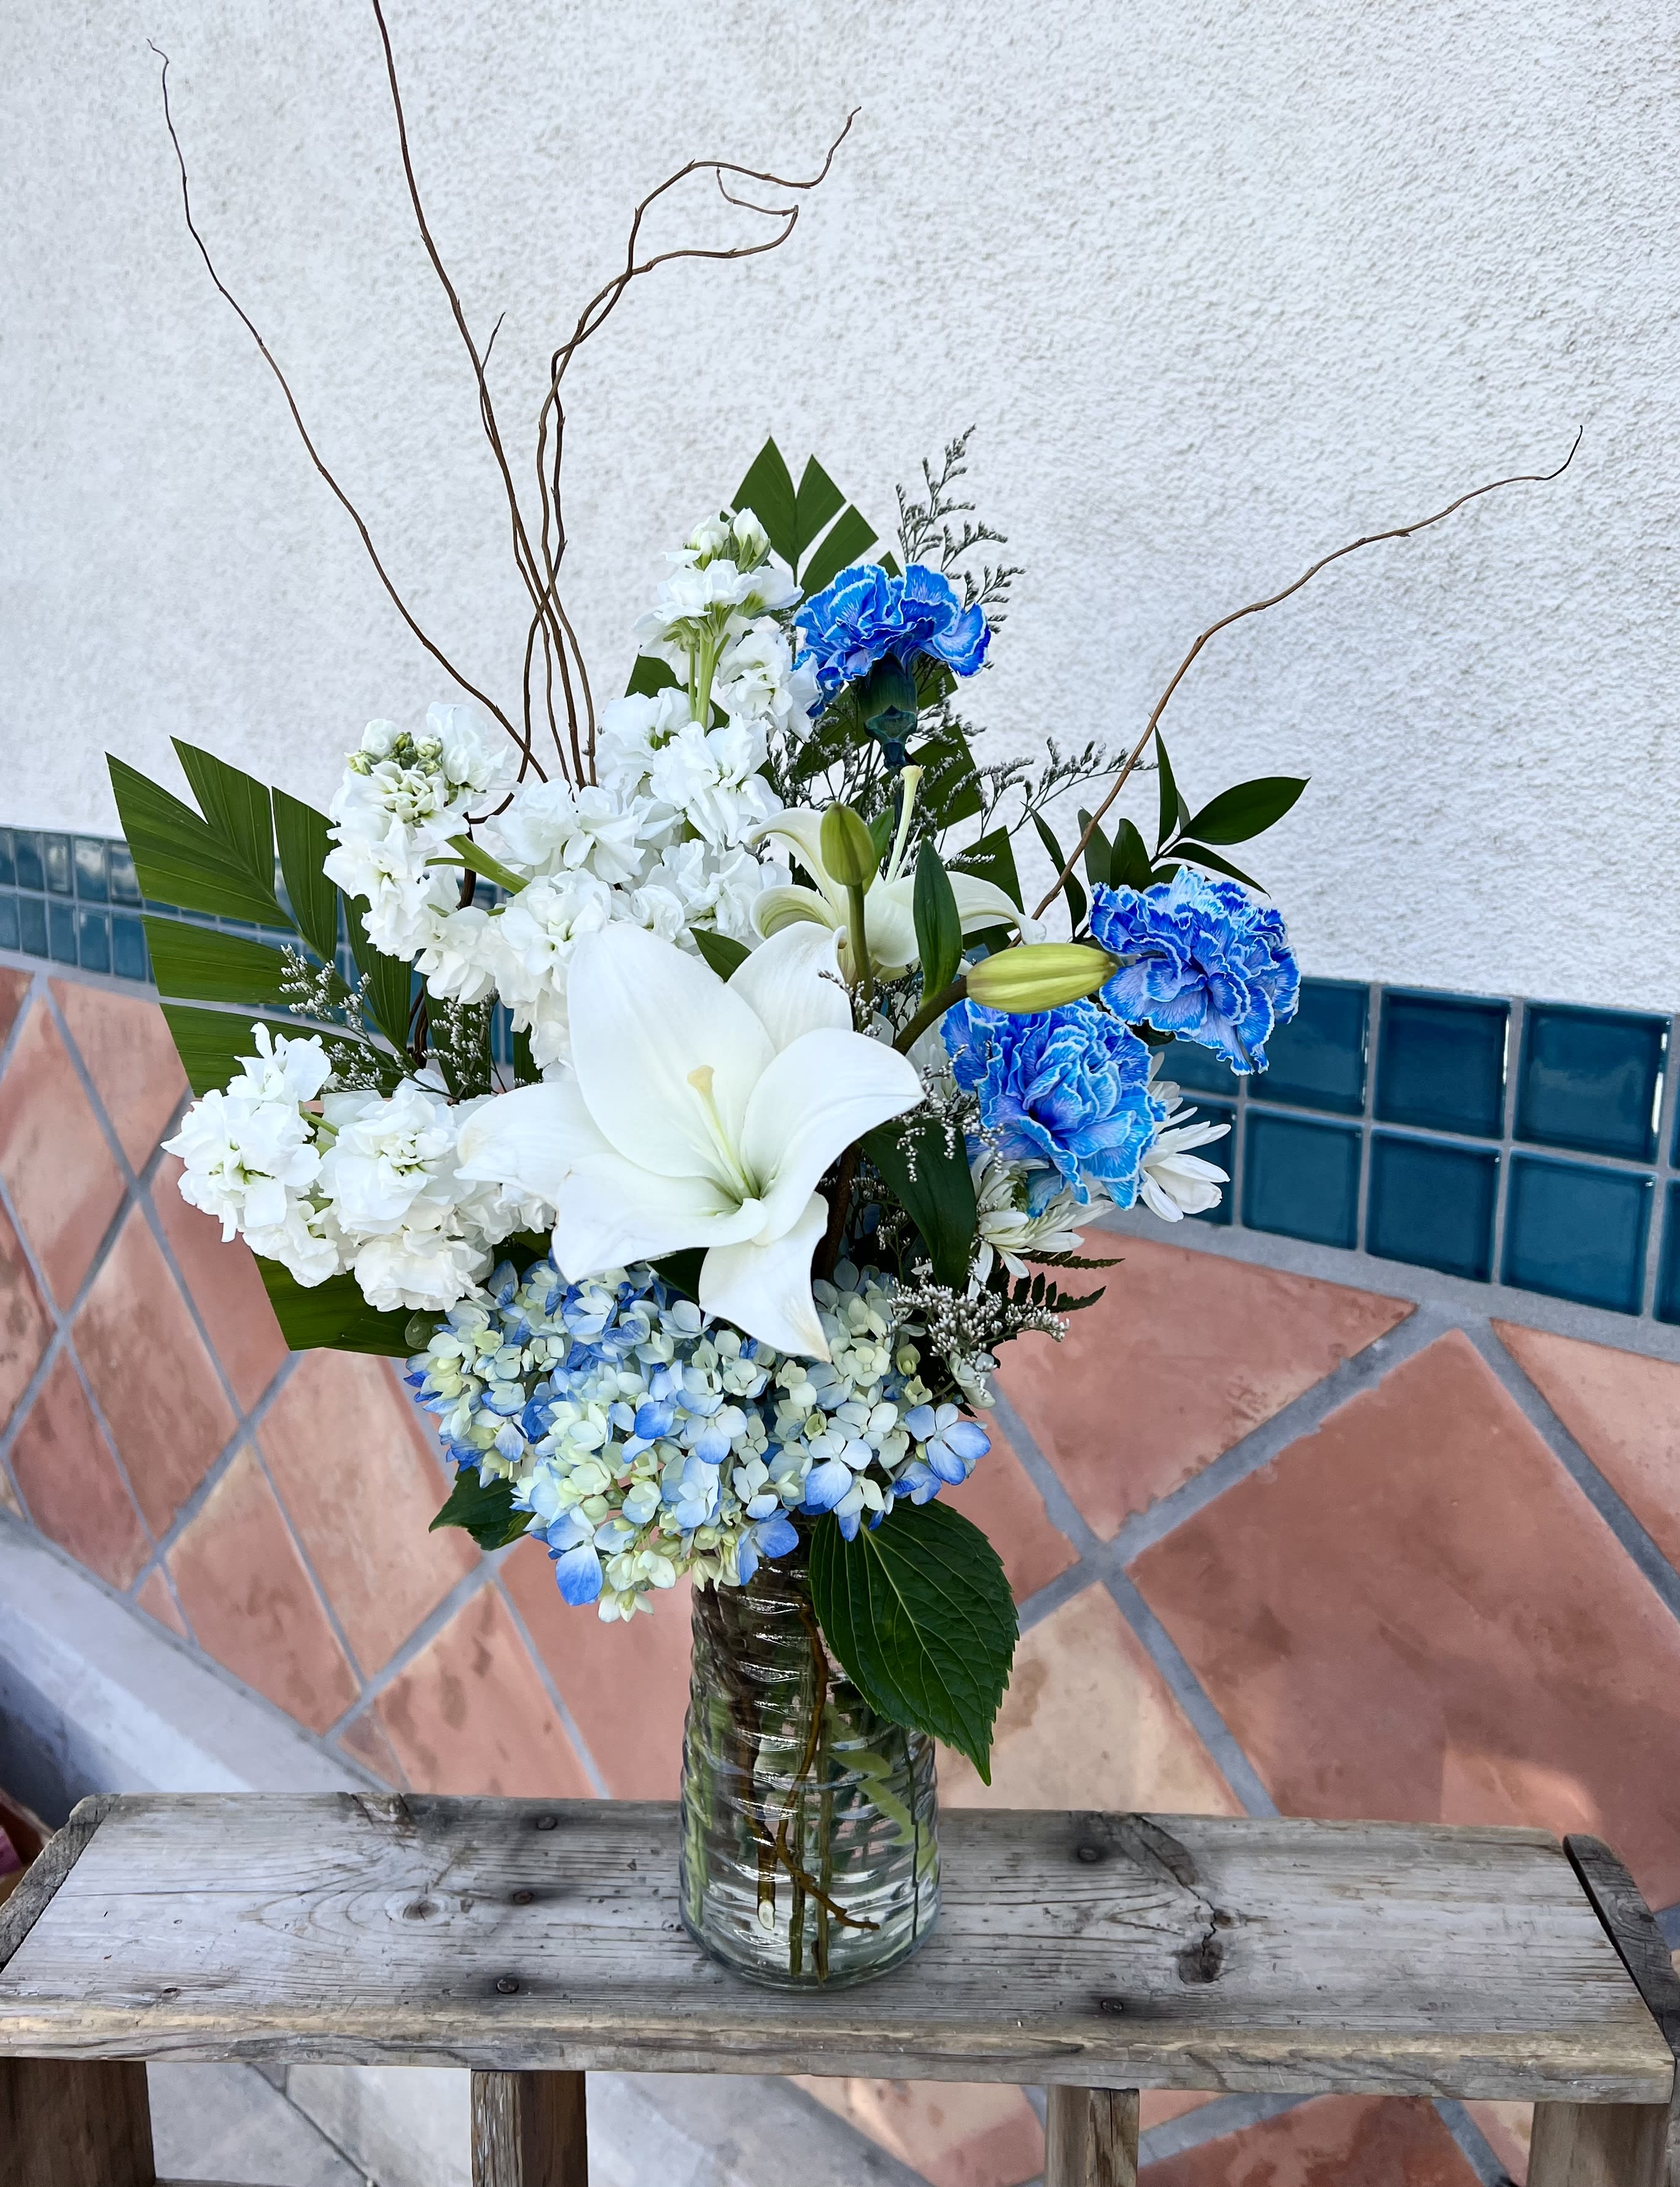 beautiful in blue and white - a mixed of blue and white color flowers: hydrangea, lilies, carnation. 